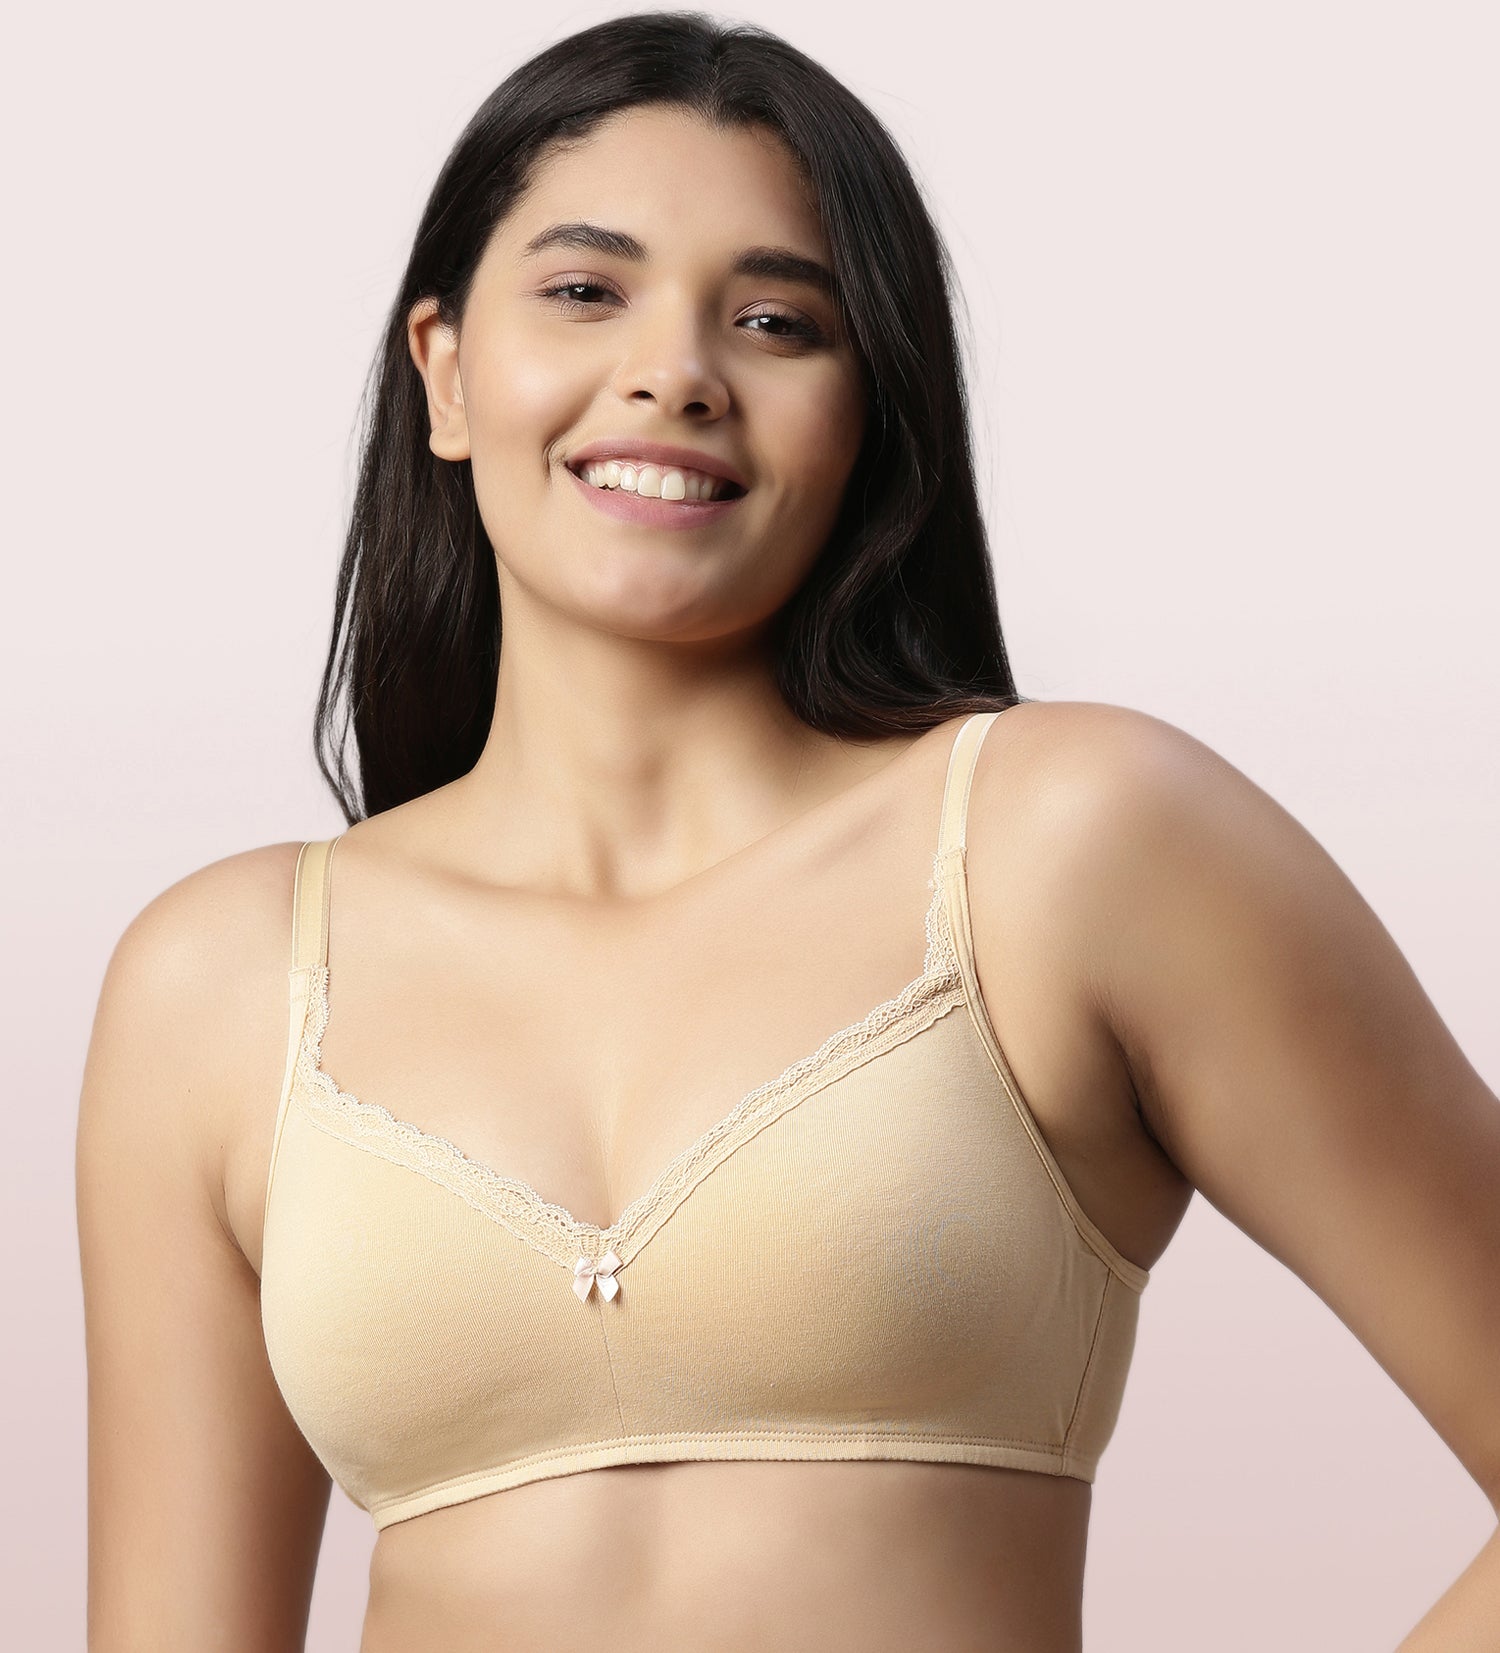 Zivame - Seamless- T-shirt Bras are seamless & disappear under